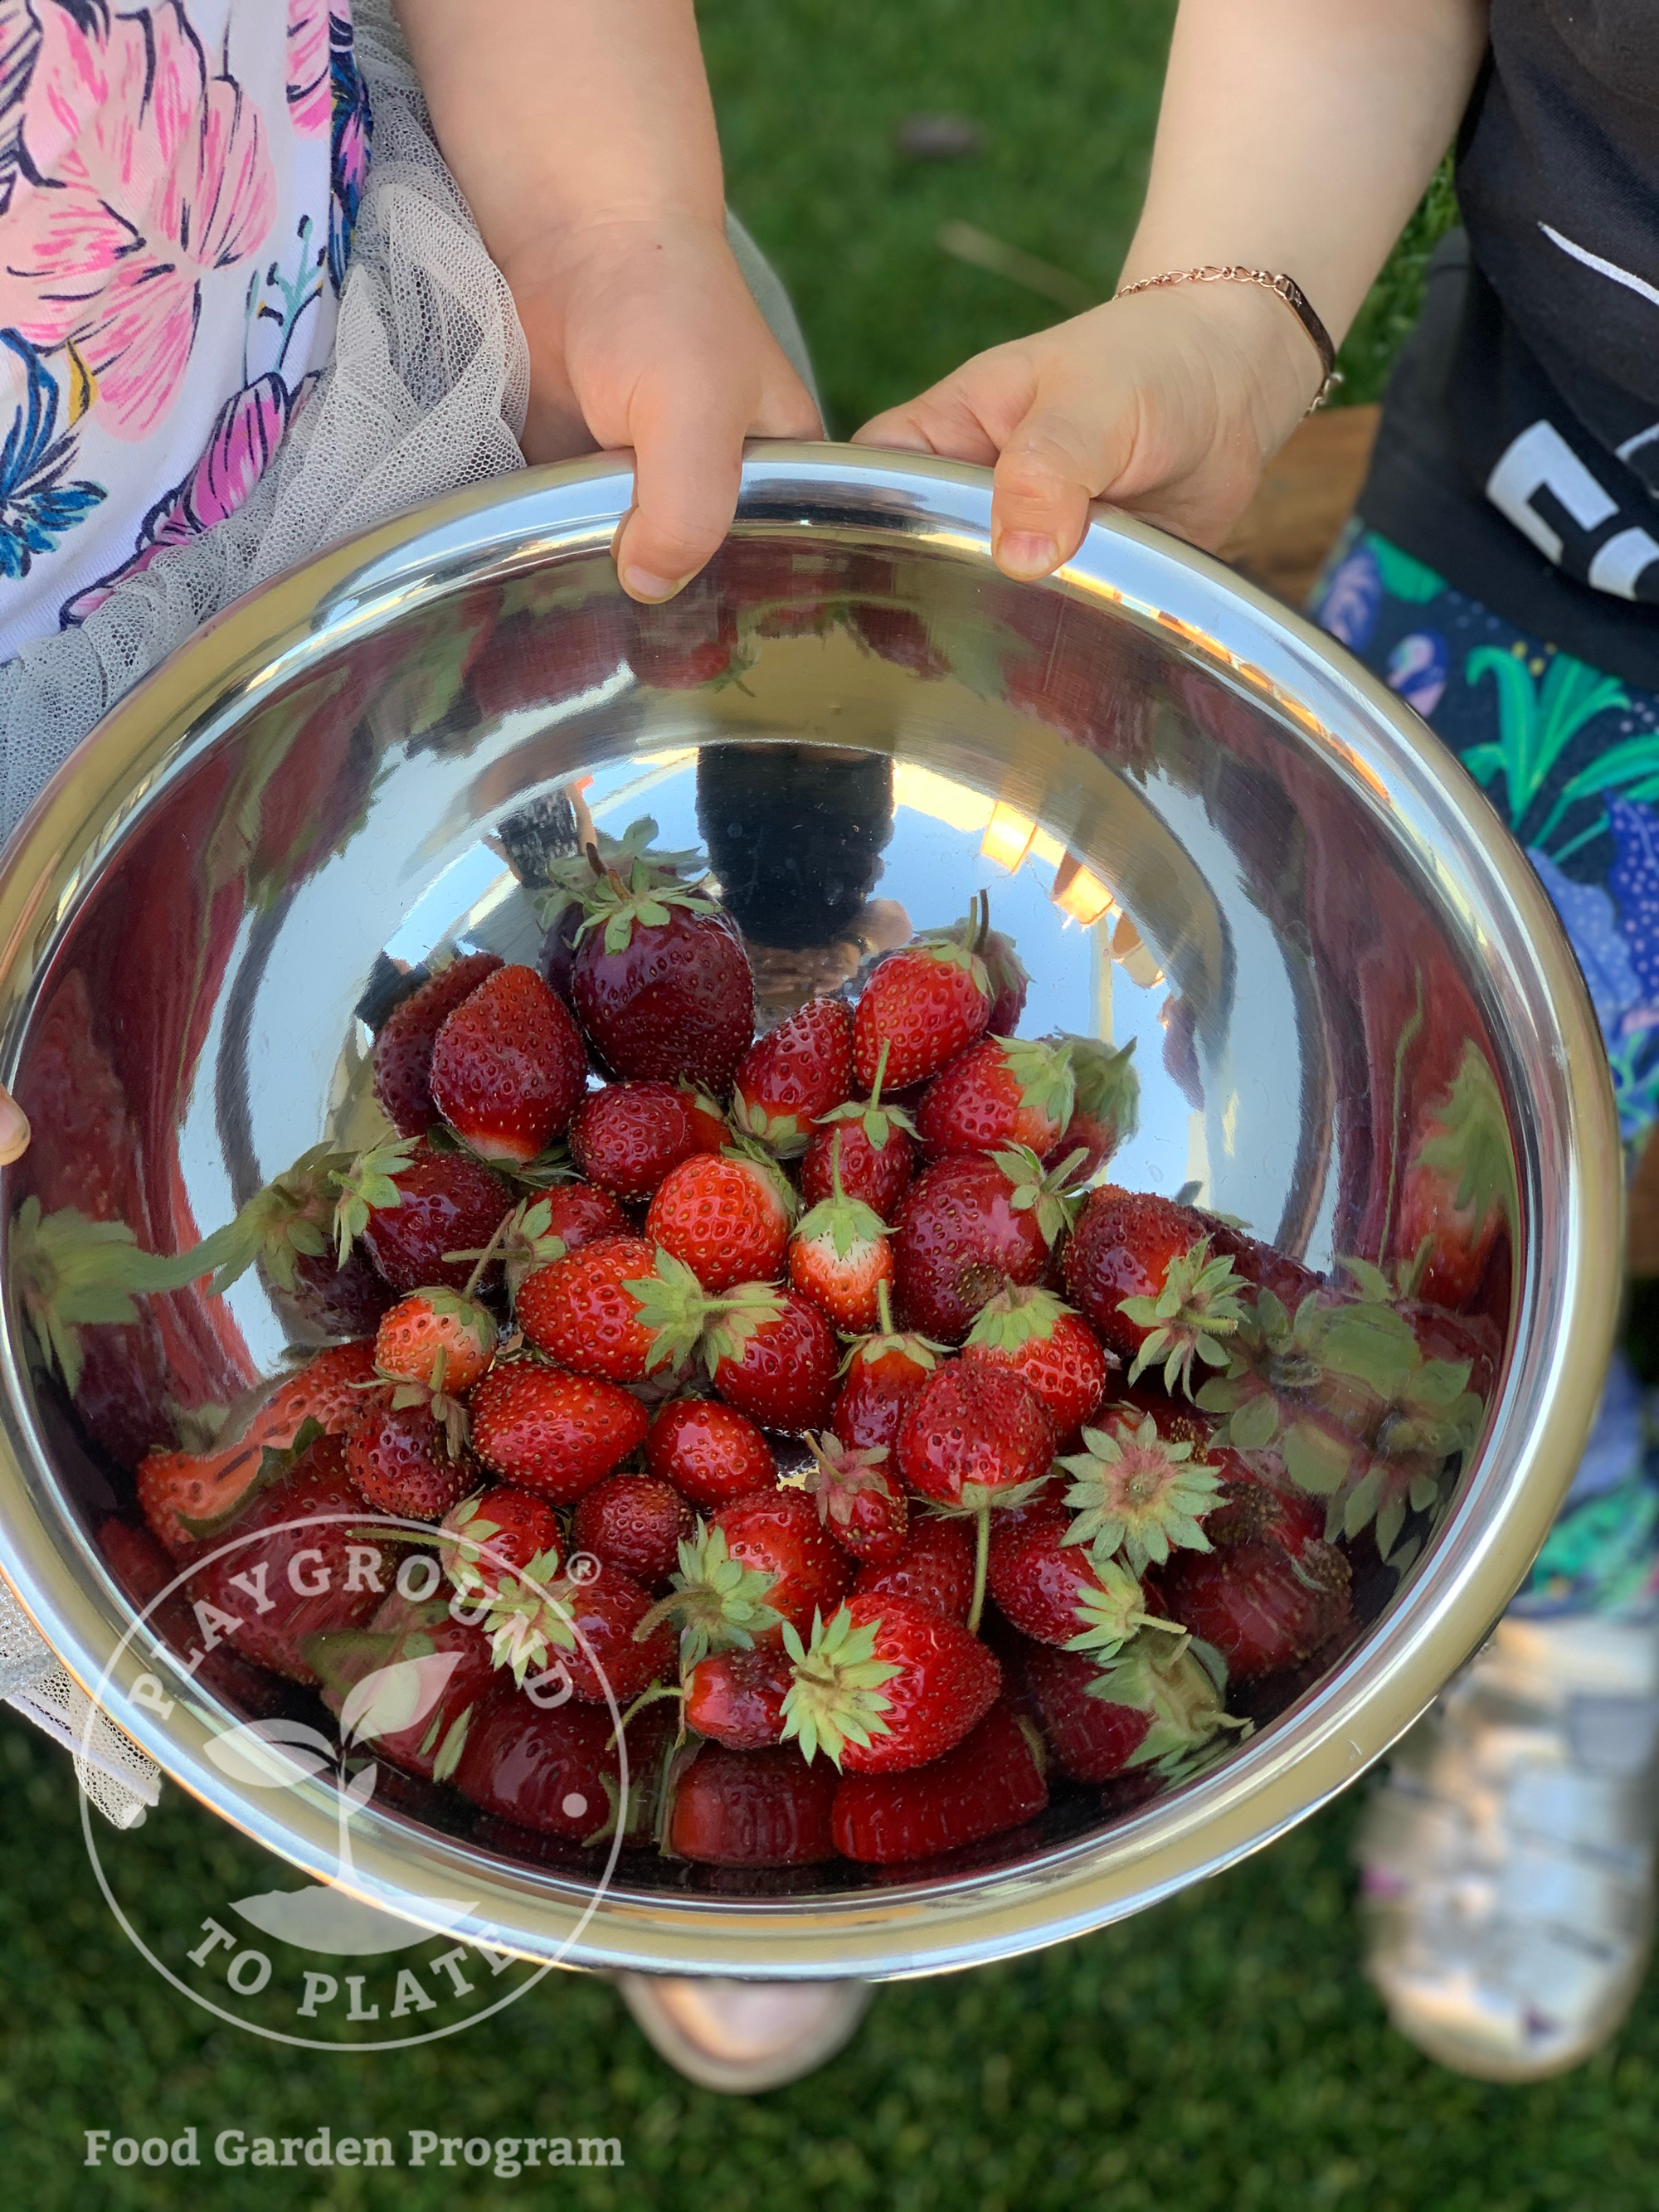 Playground_to_Plate_Fitzroy_ELC_harvested_strawberries